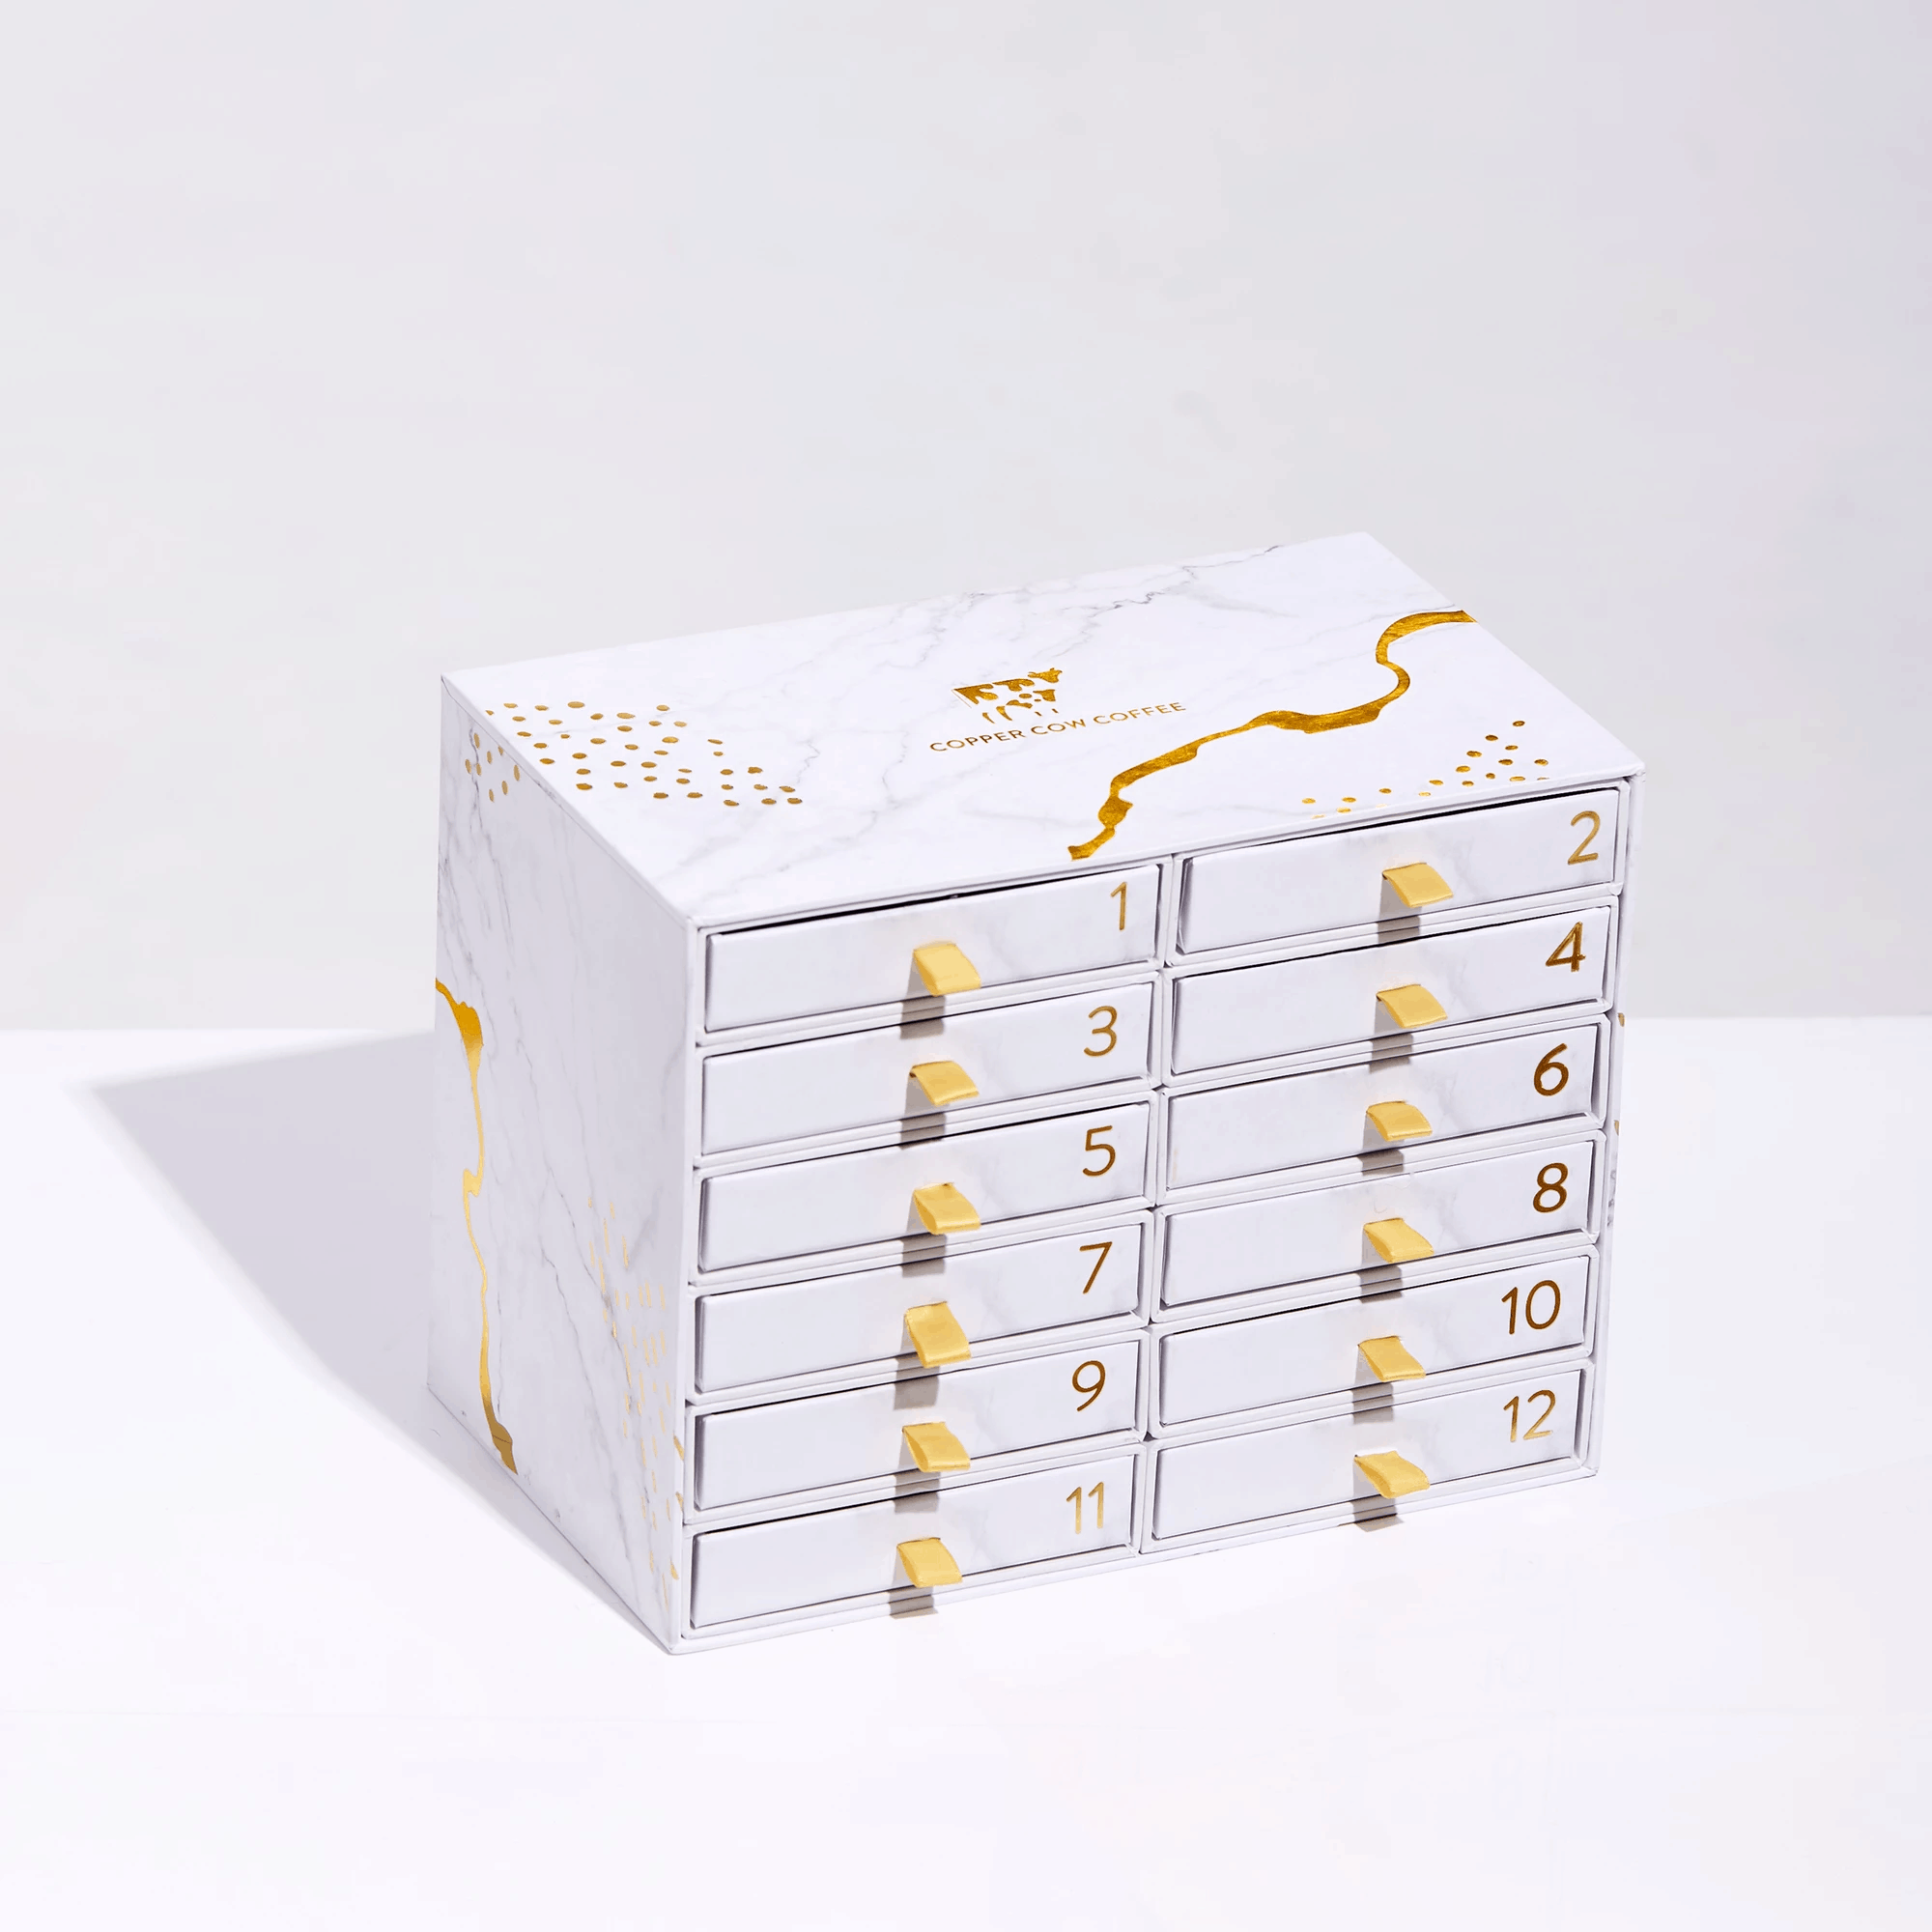 2020 Copper Cow Coffee Advent Calendar Available Now For Preorder